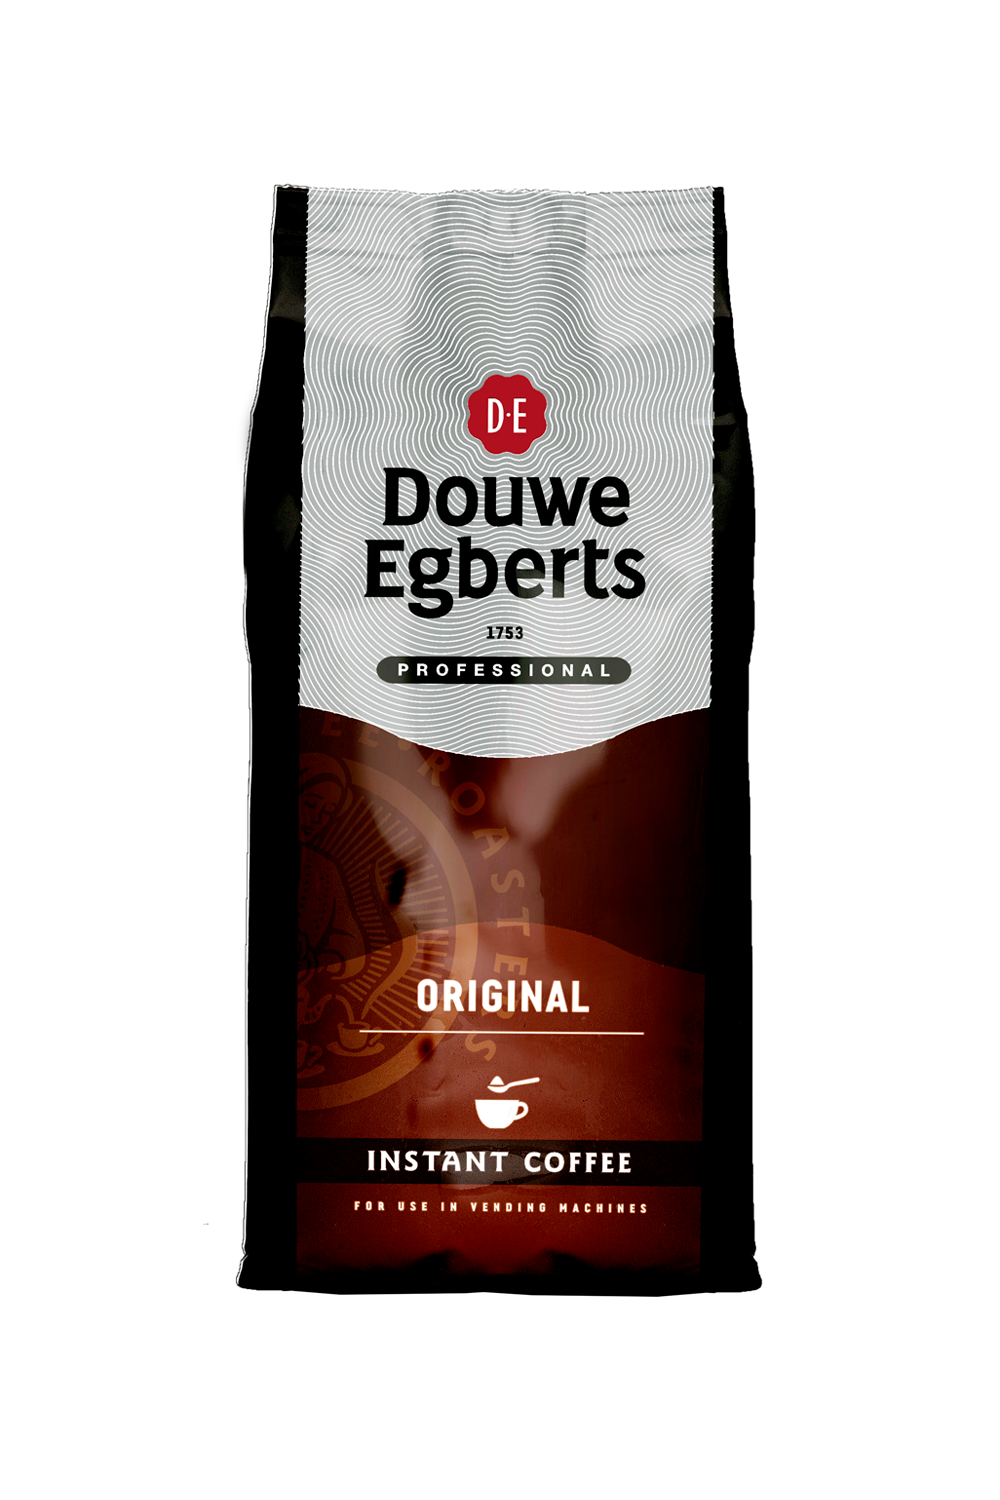 Douwe Egberts Original instant coffee 300g. For use through vending machines as a refill